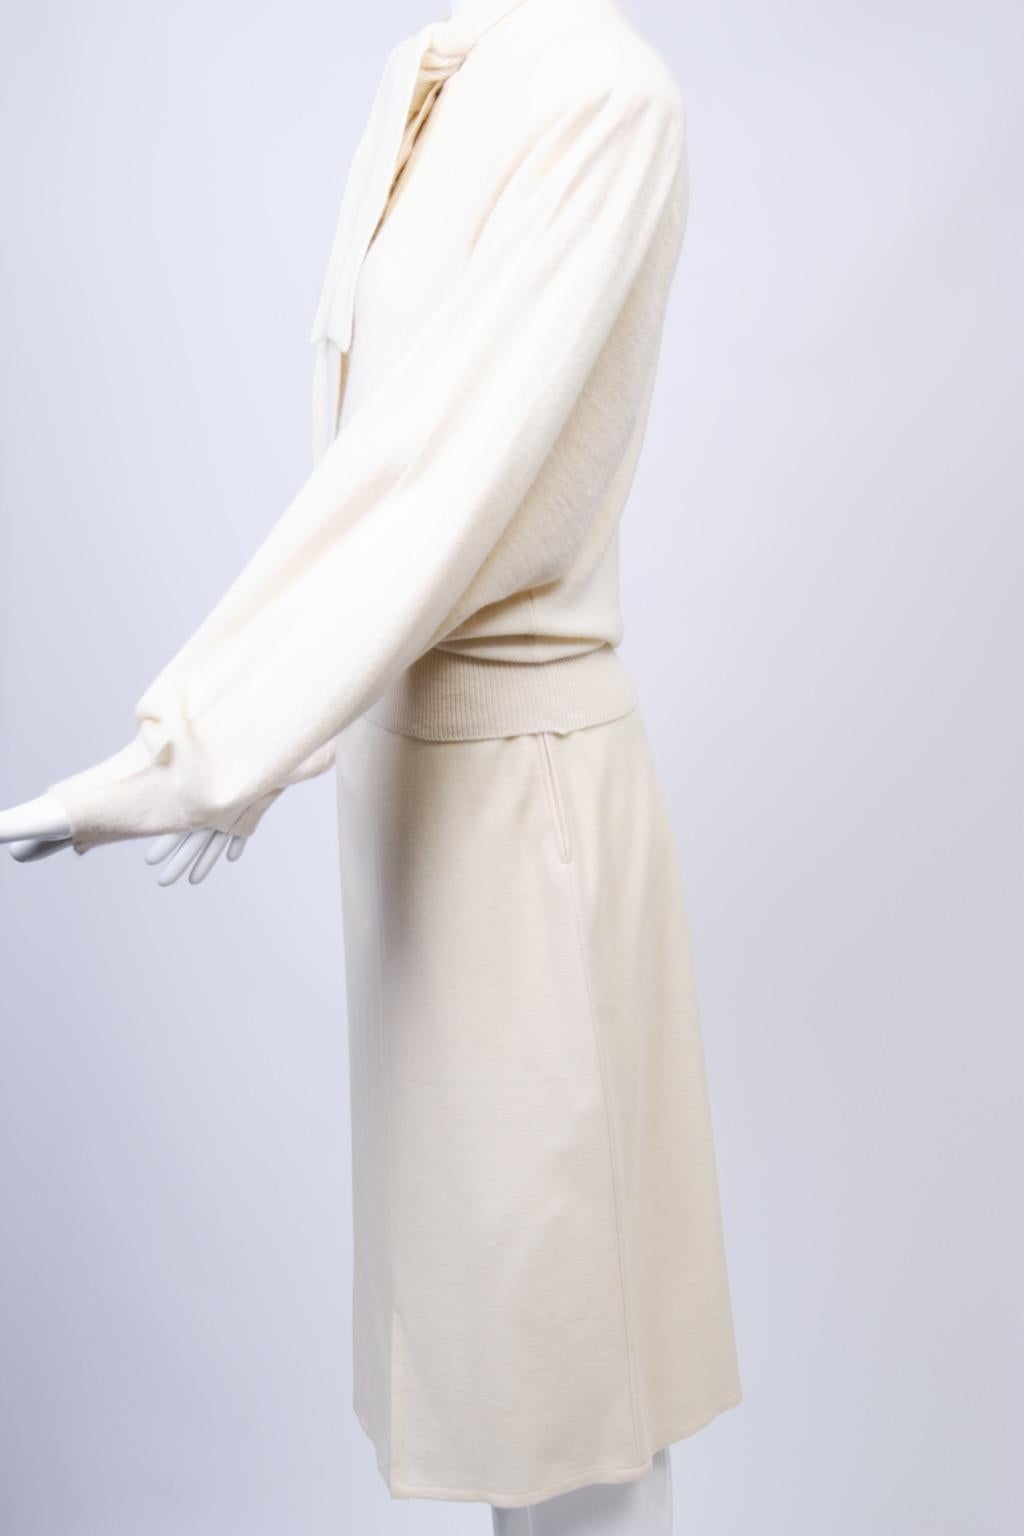 Sonia Rykiel Ivory Sweater and Skirt Ensemble For Sale 1